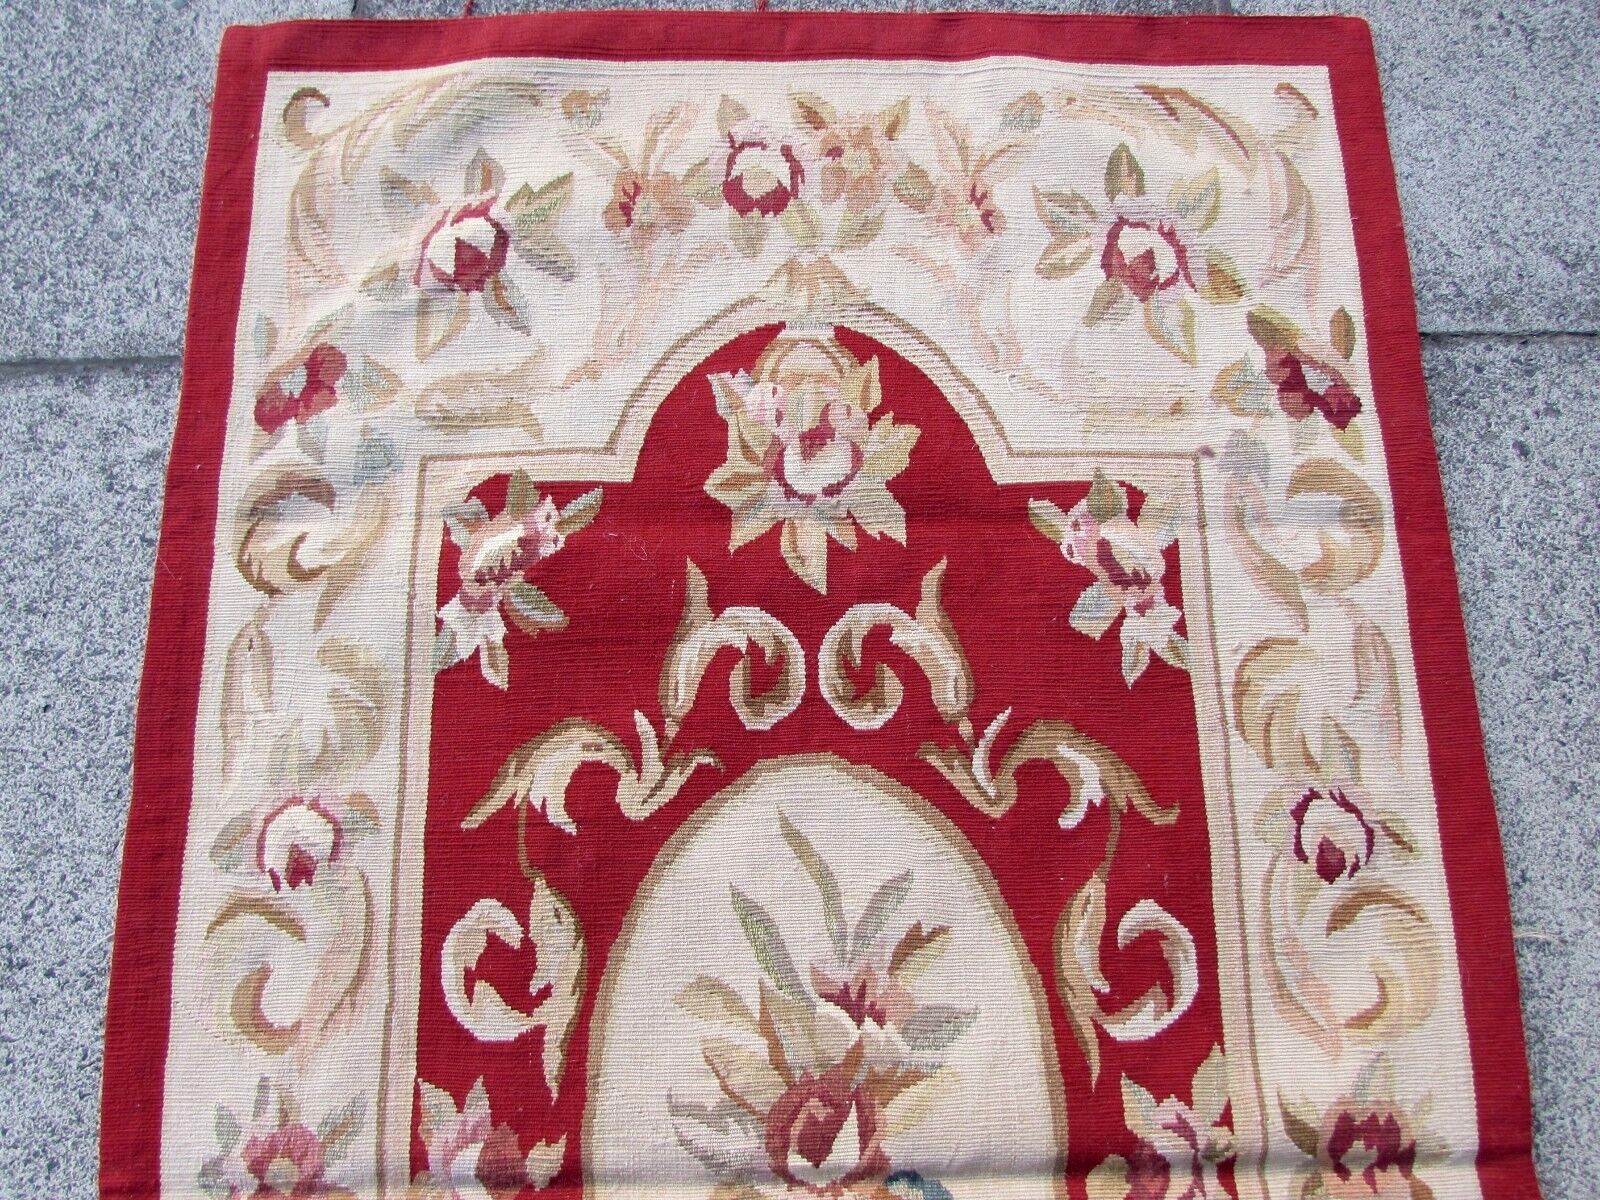 Intricate geometric and floral design on French handmade rug